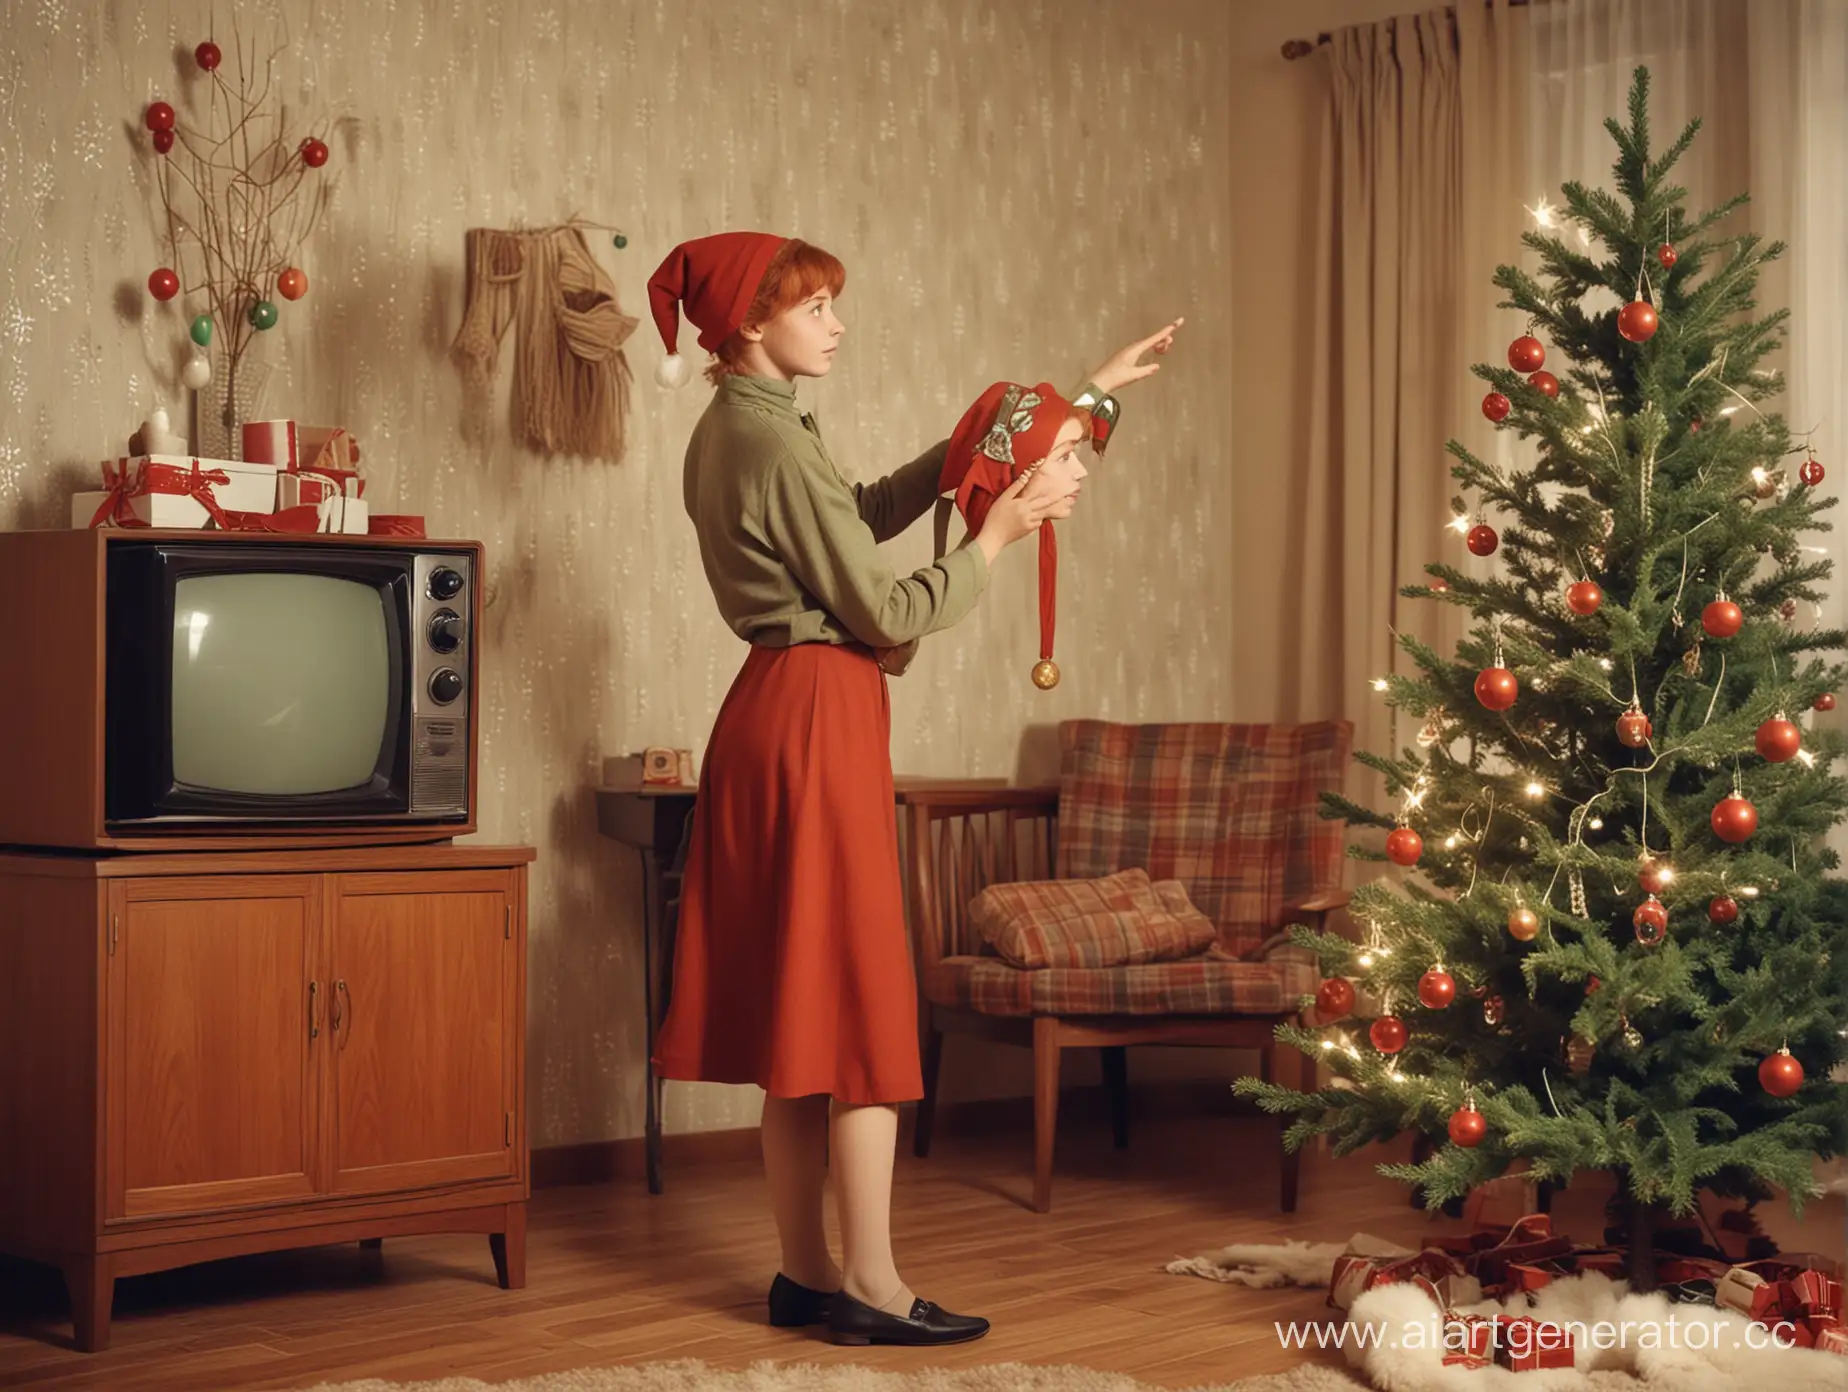 Vintage photo of a thin young red-haired short-haired elf girl with no hat decorating a christmas tree in a cozy soviet apartment by the TV. Extremely  photo of a thin young elf red-haired short-haired girl decorating a christmas tree in a cozy soviet apartment by the TV.